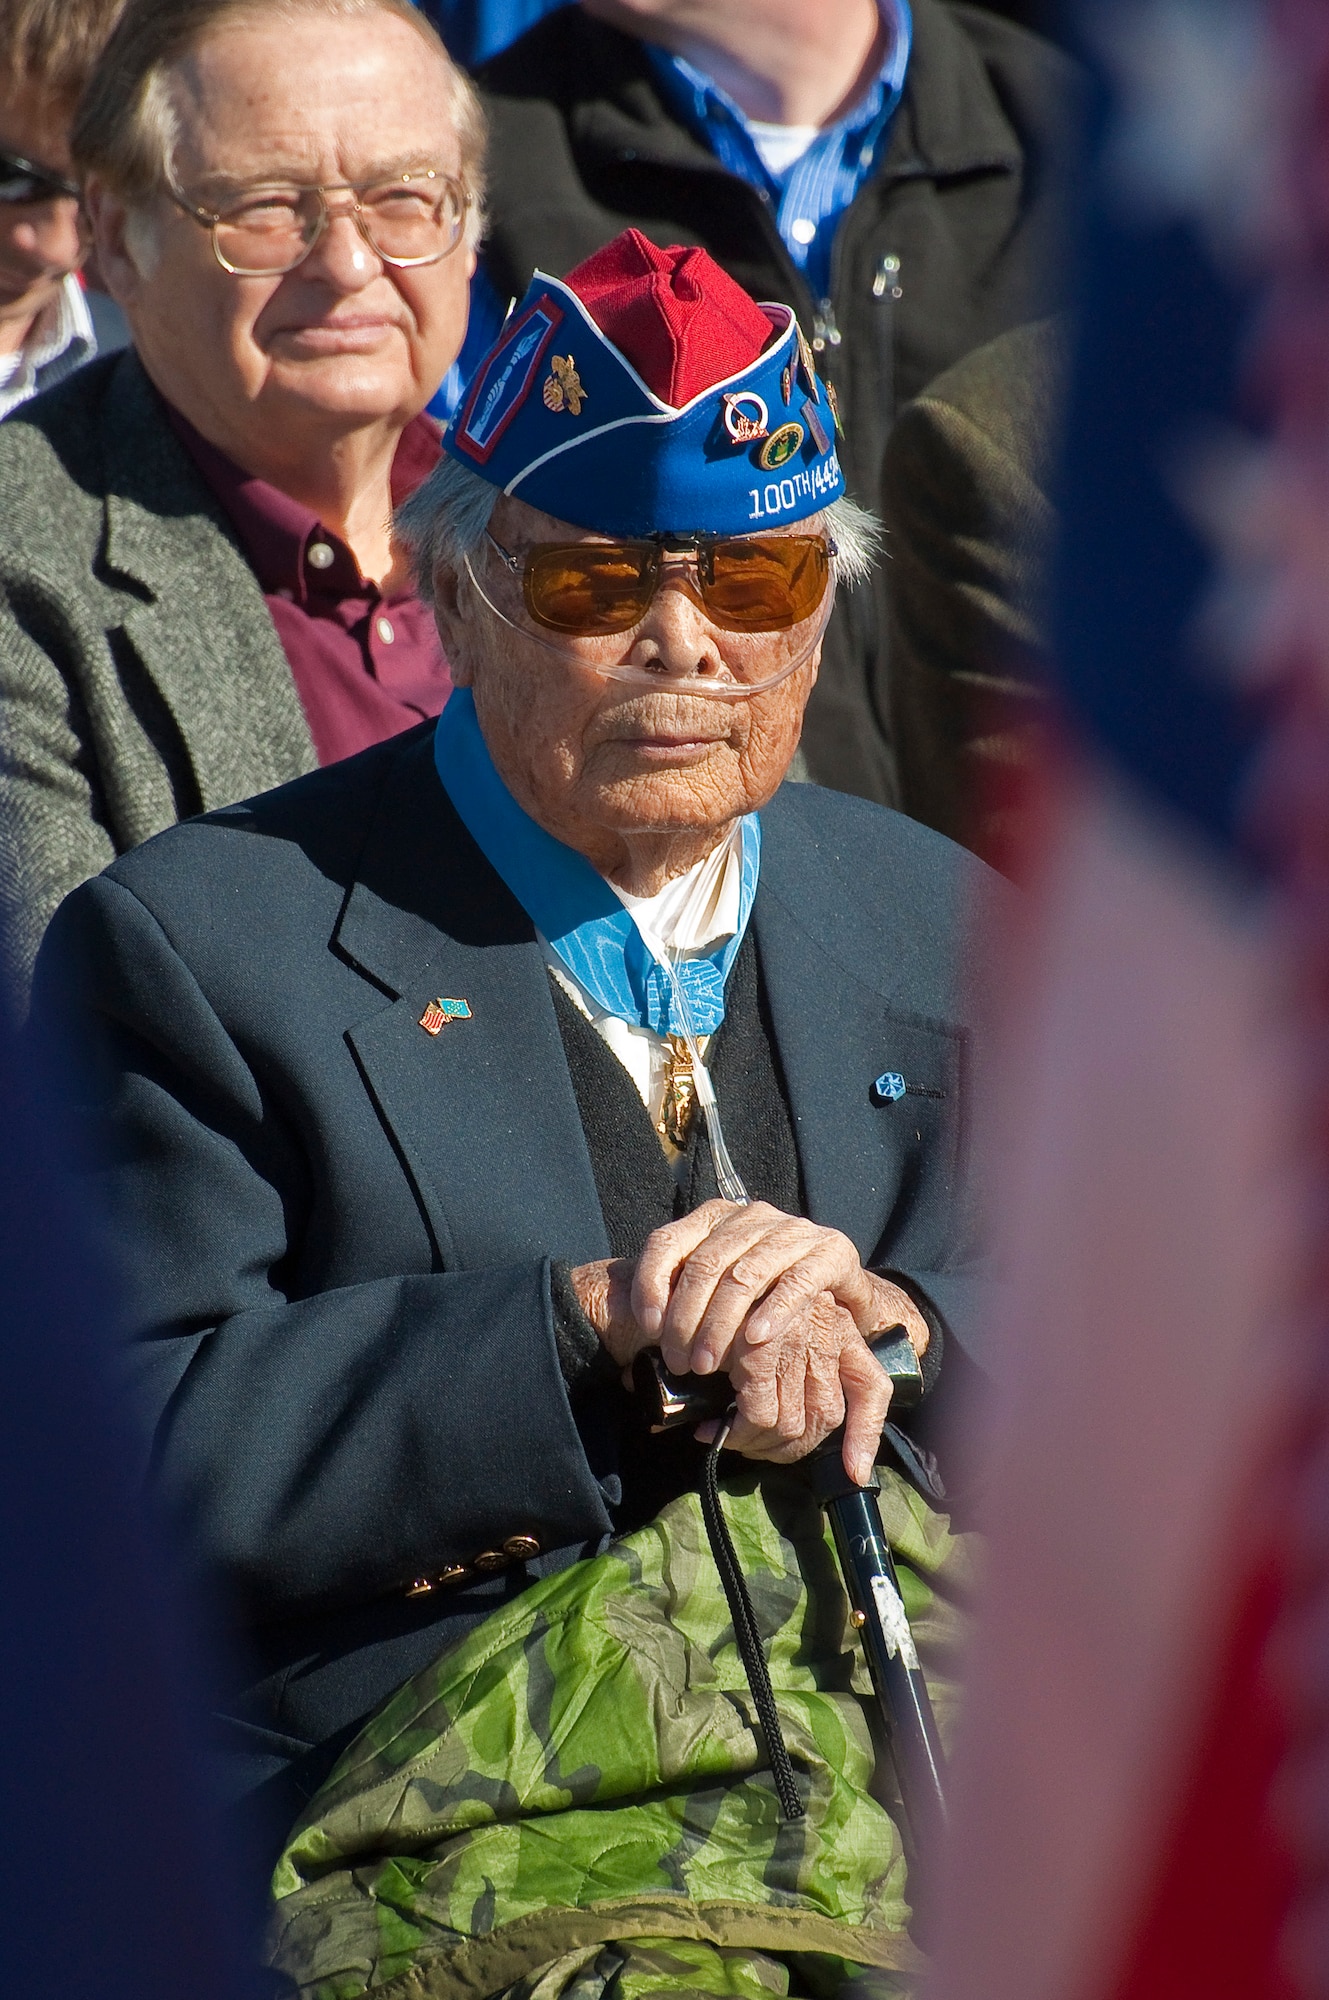 Pvt. George Sakato, World War II Medal of Honor recipient, watches the groundbreaking ceremony for the Colorado Freedom Memorial Feb. 2, 2013, in Aurora, Colo. The memorial is a 12-year effort led by Rick Crandall and members for the CFM Foundation. The memorial will list the names of all Colorado service members from all branches and all wars who died during combat operations on foreign soil since Colorado became a state. This is the first memorial of its kind, which names members from all service branches and all wars. (Colorado Air National Guard photo by Capt. Darin Overstreet/Released)